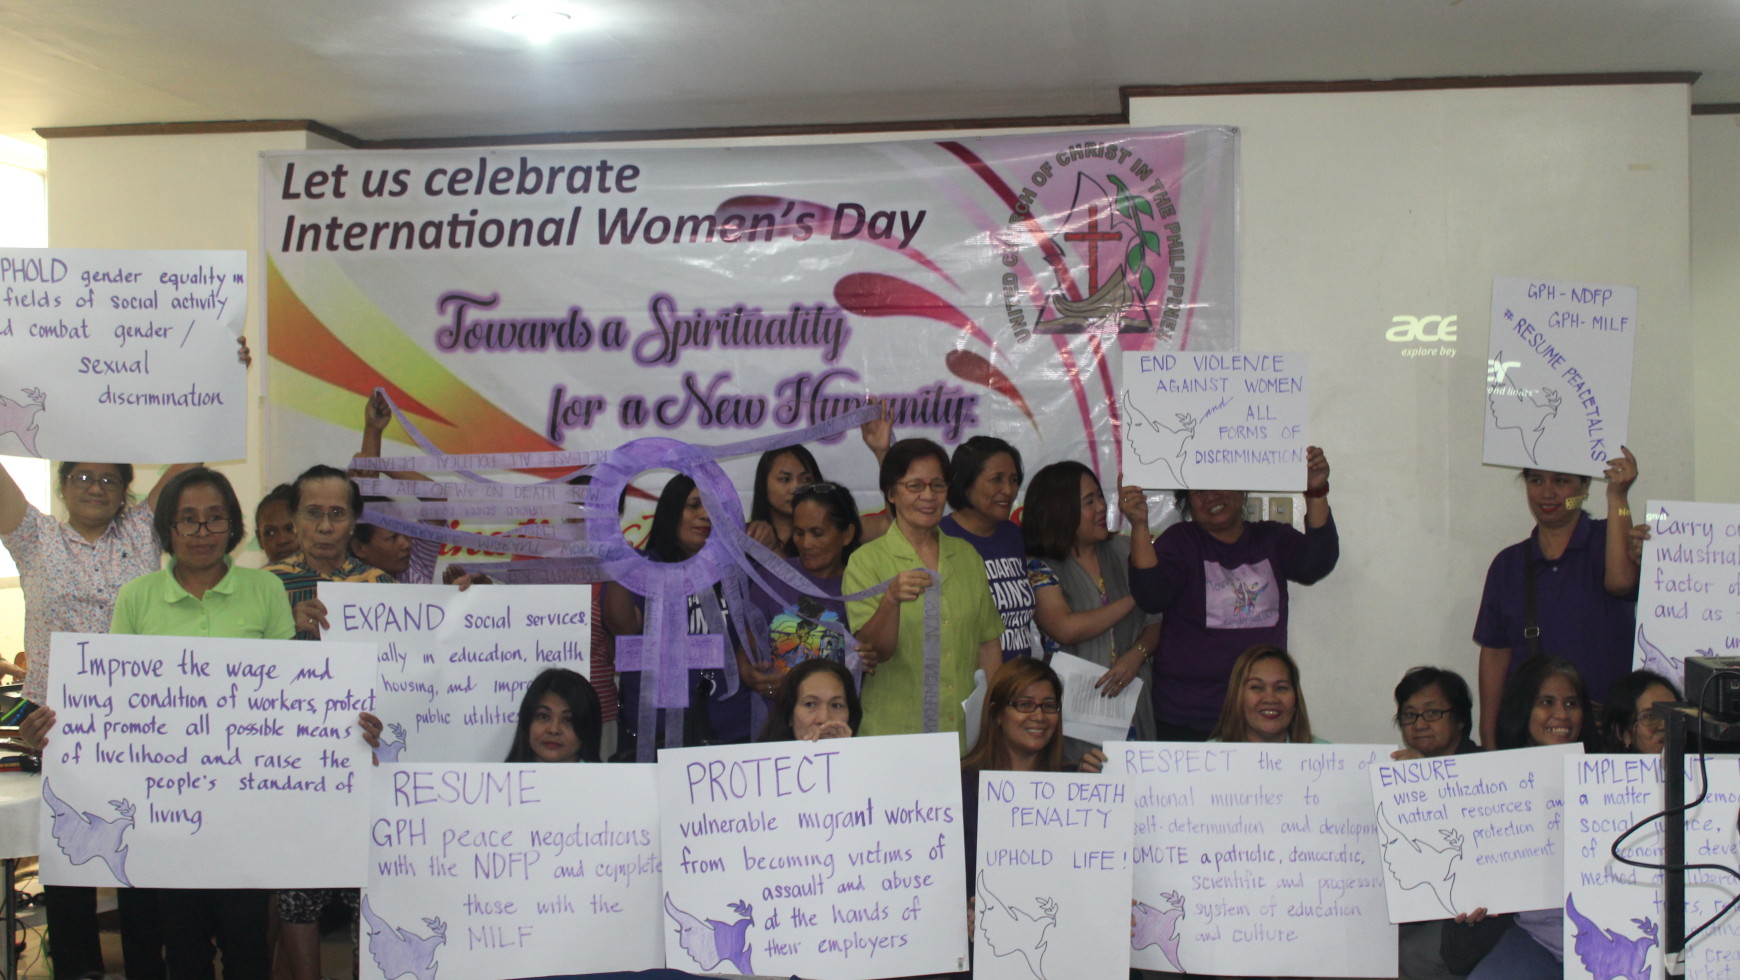 CALL TO ACTION ON INTERNATIONAL WOMEN’S DAY CELEBRATION 2017